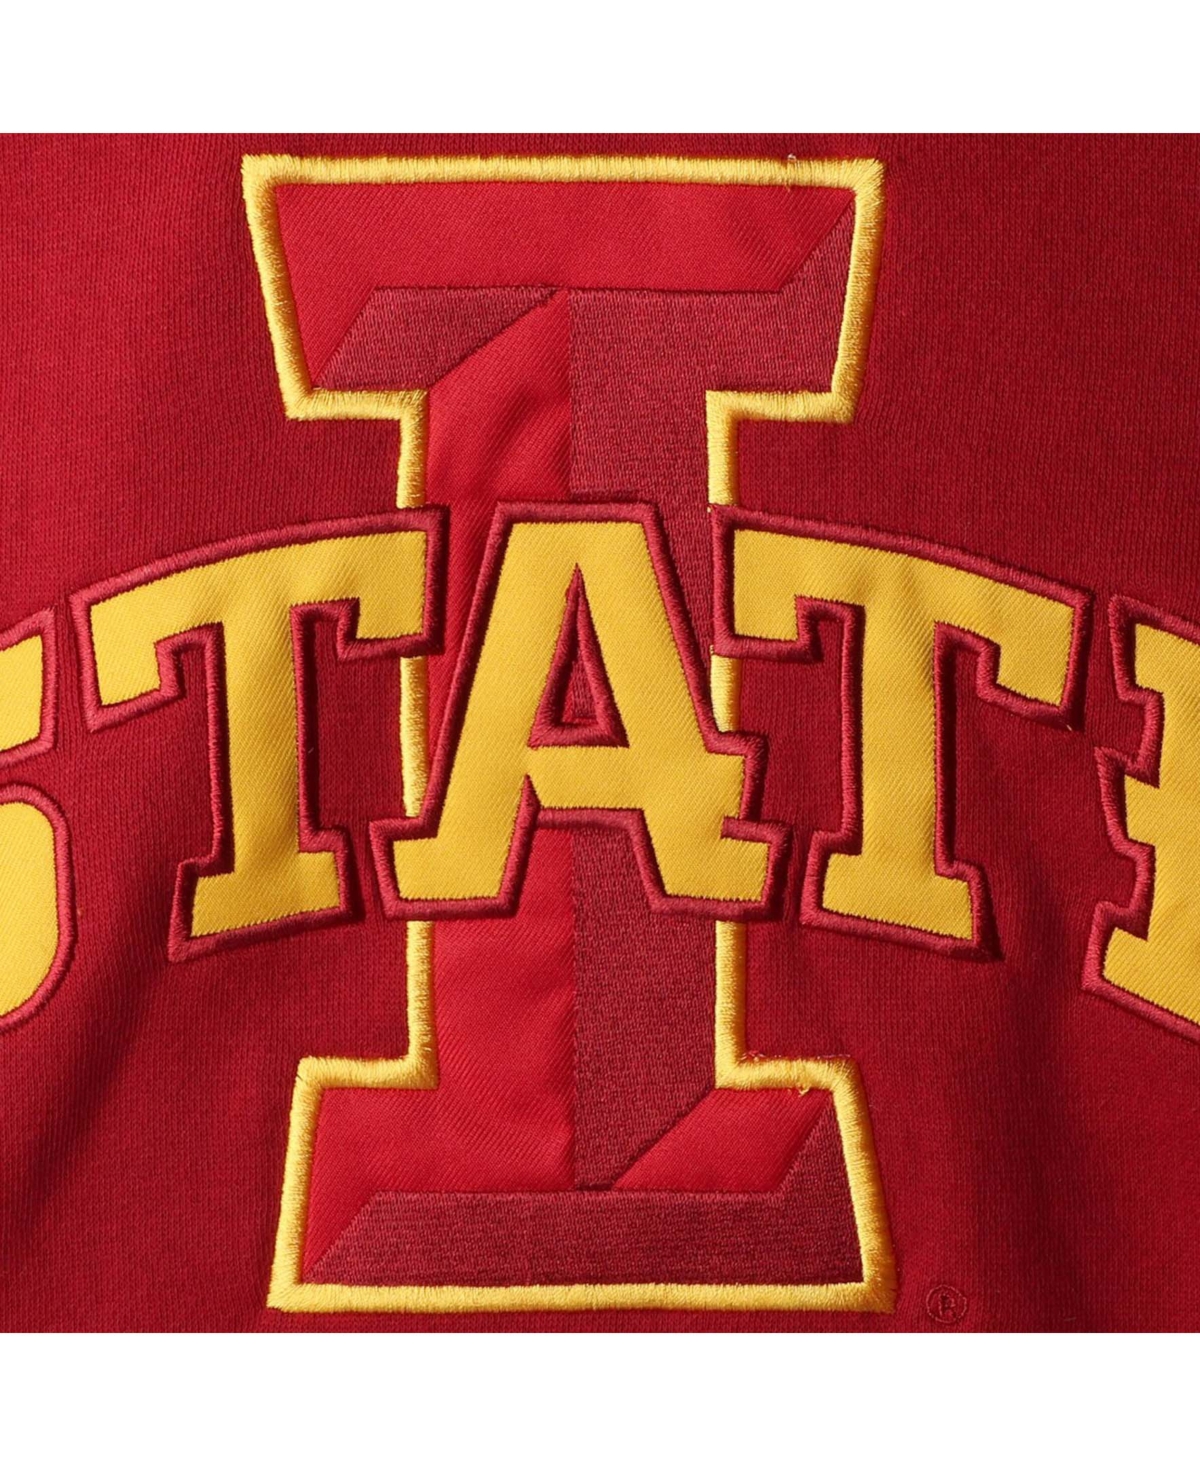 Shop Colosseum Men's Cardinal Iowa State Cyclones 2.0 Lace-up Pullover Hoodie